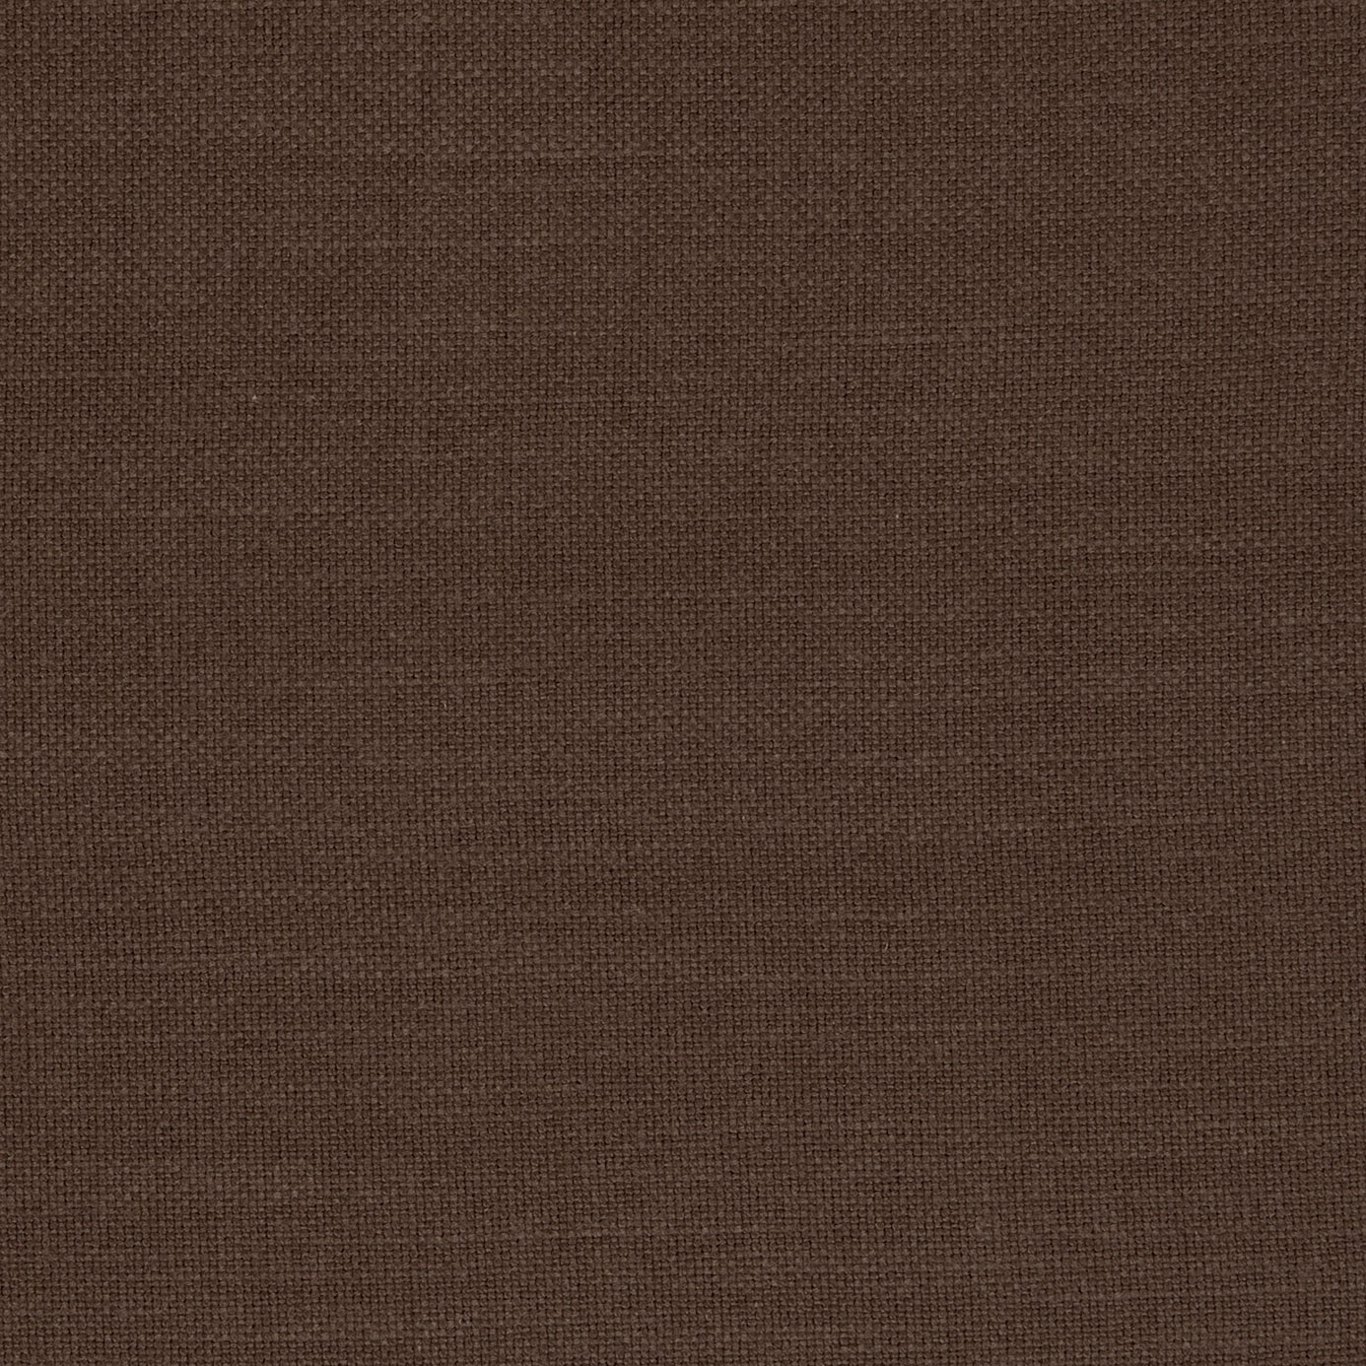 Nantucket Cocoa Fabric by CNC